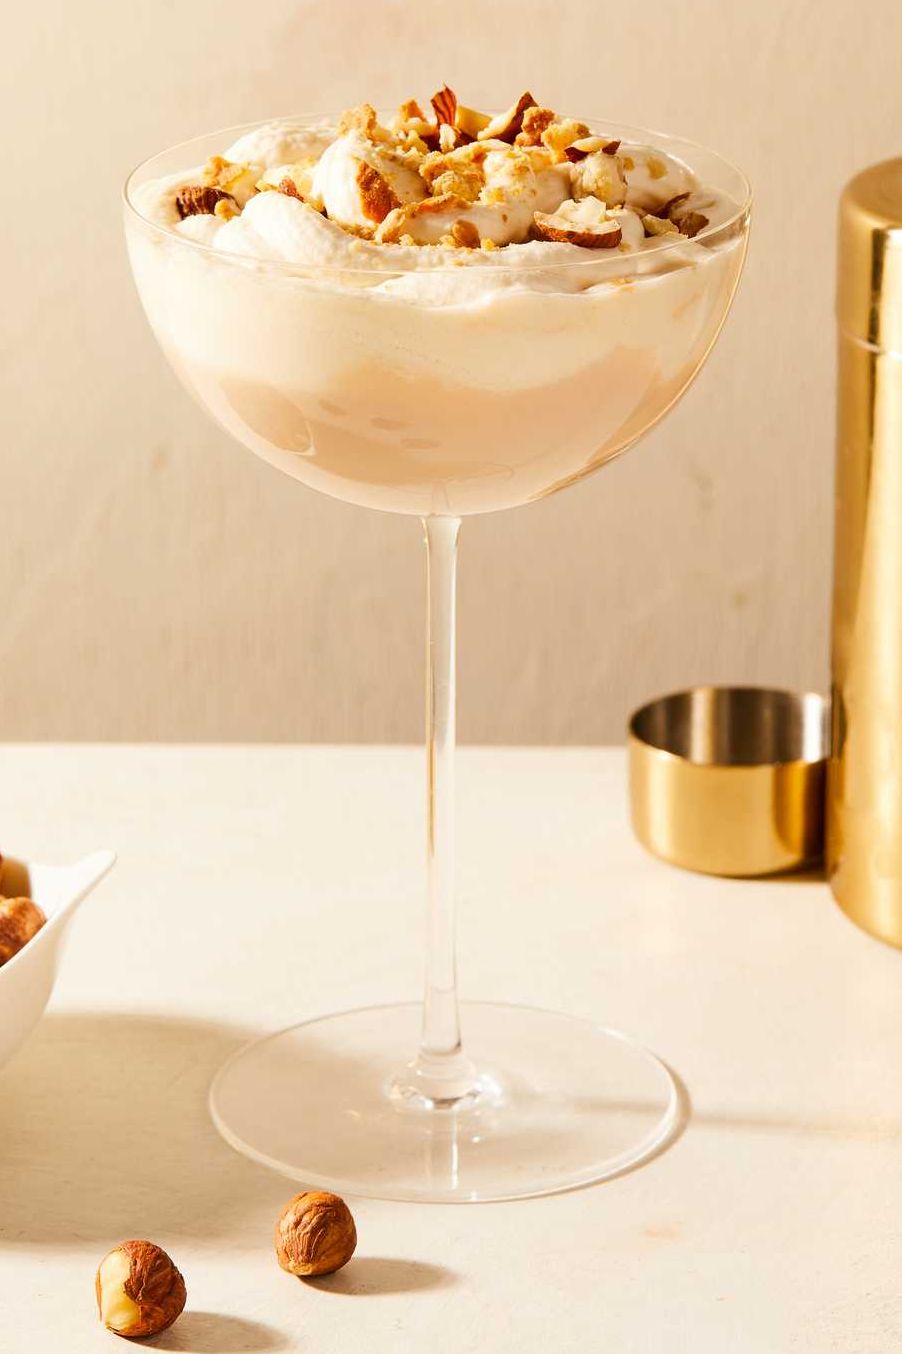 nutty irishman creamy cocktail topped with crushed hazelnuts in a coupe